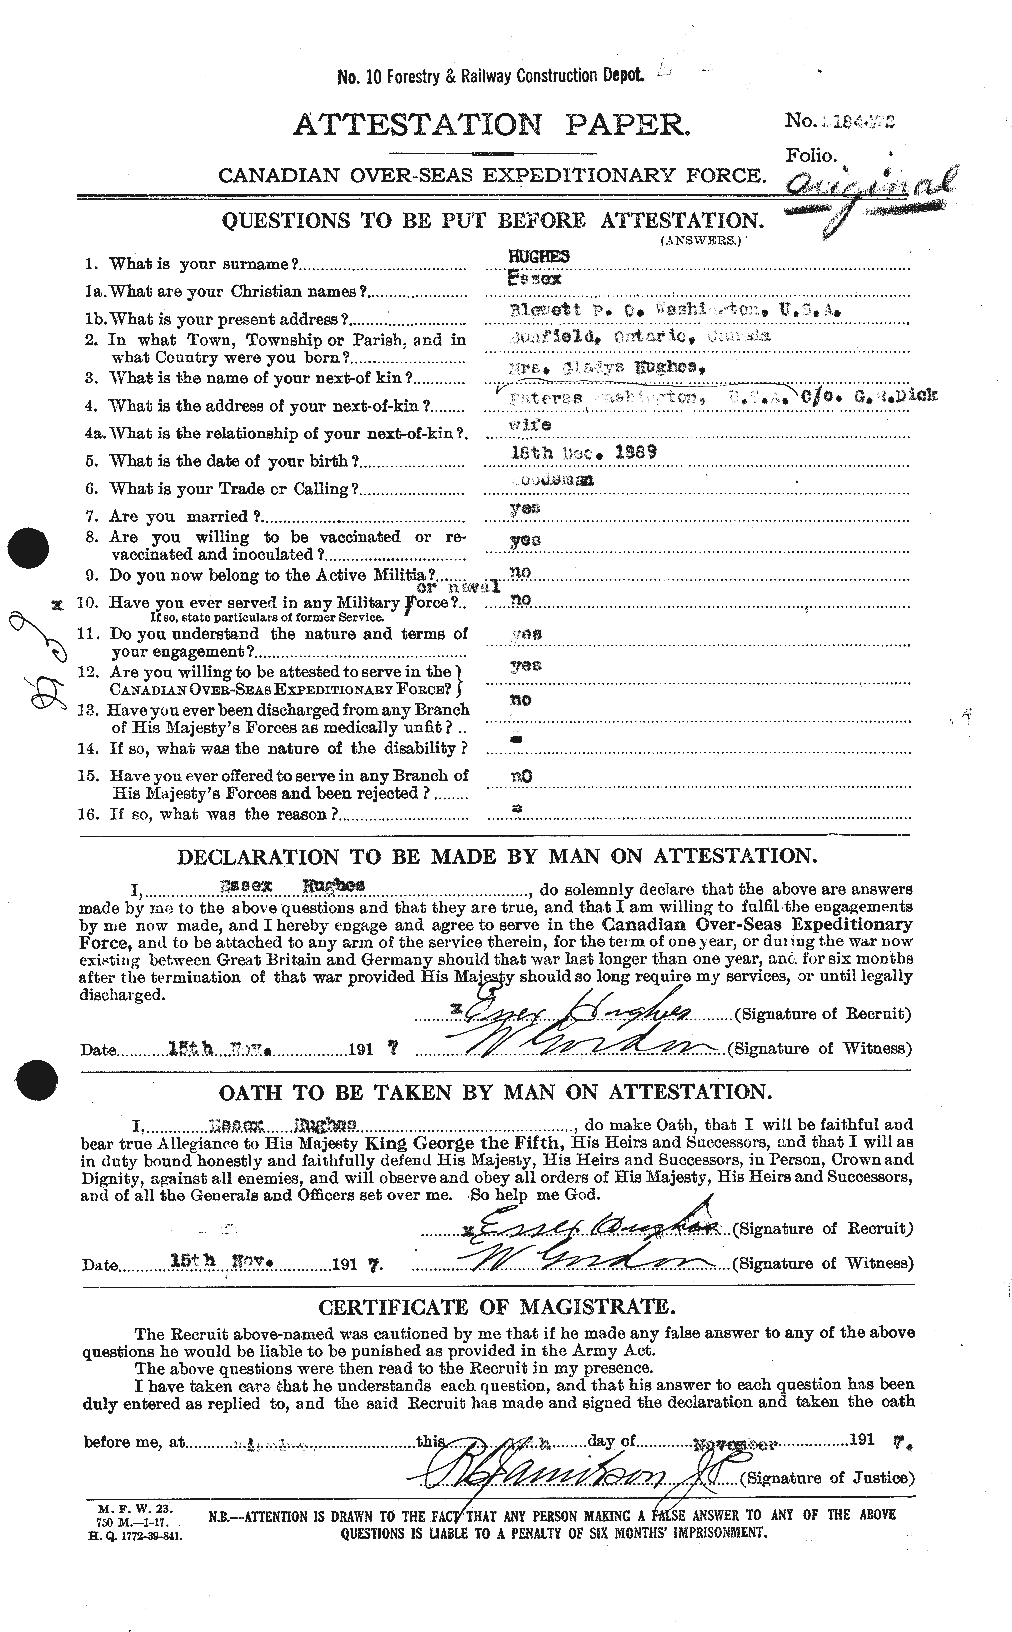 Personnel Records of the First World War - CEF 403758a